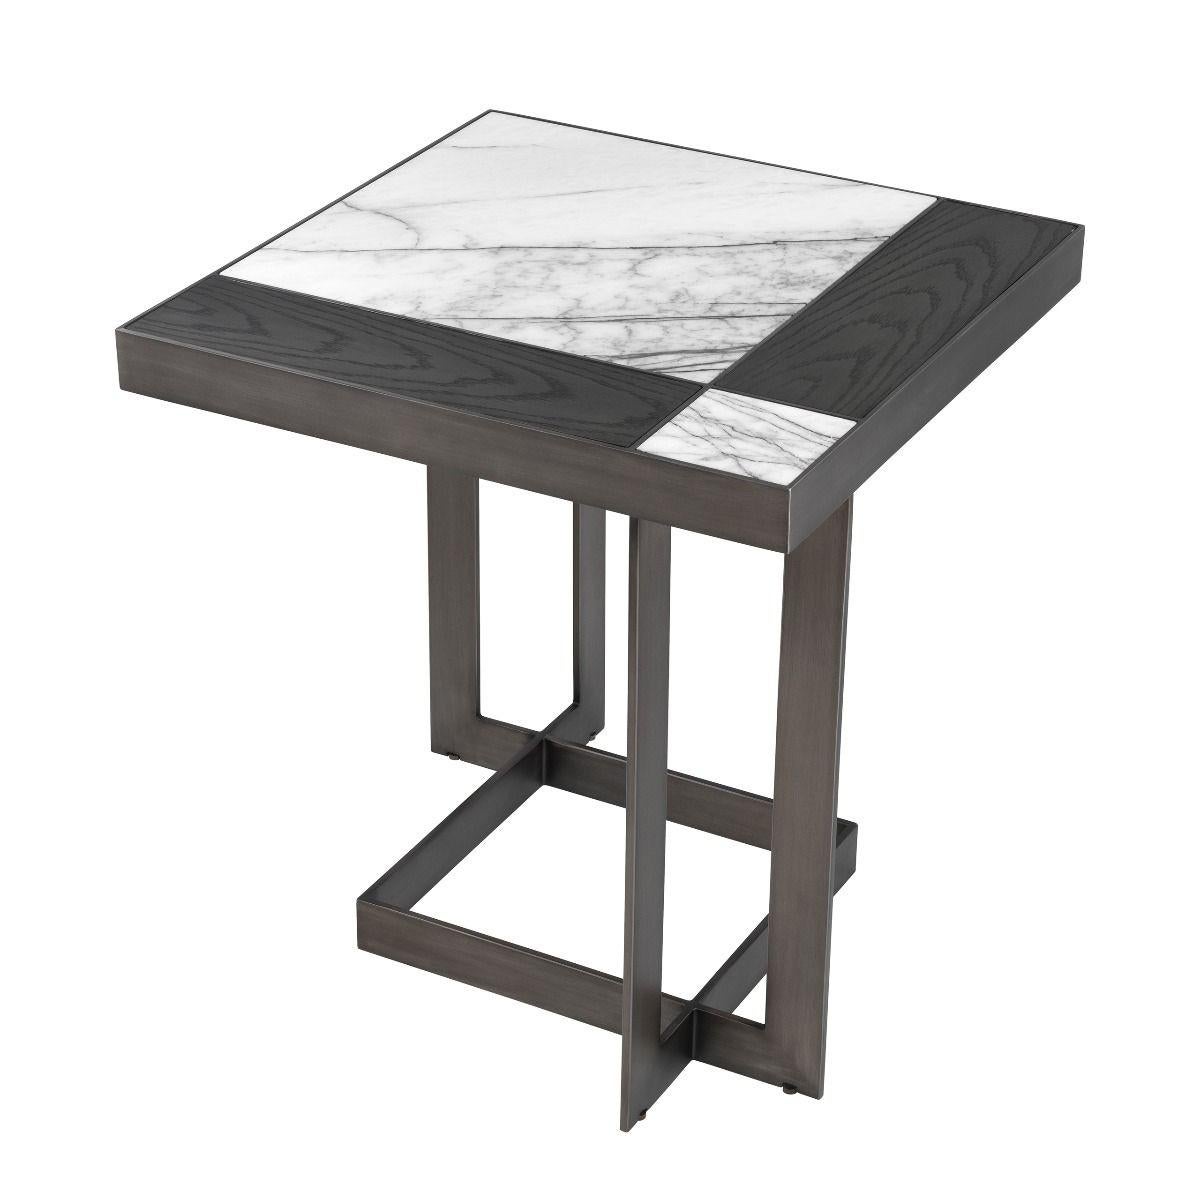 Side table black oak marble with stainless steel
structure in gunmetal finish. With white marble and
black oak top.
  